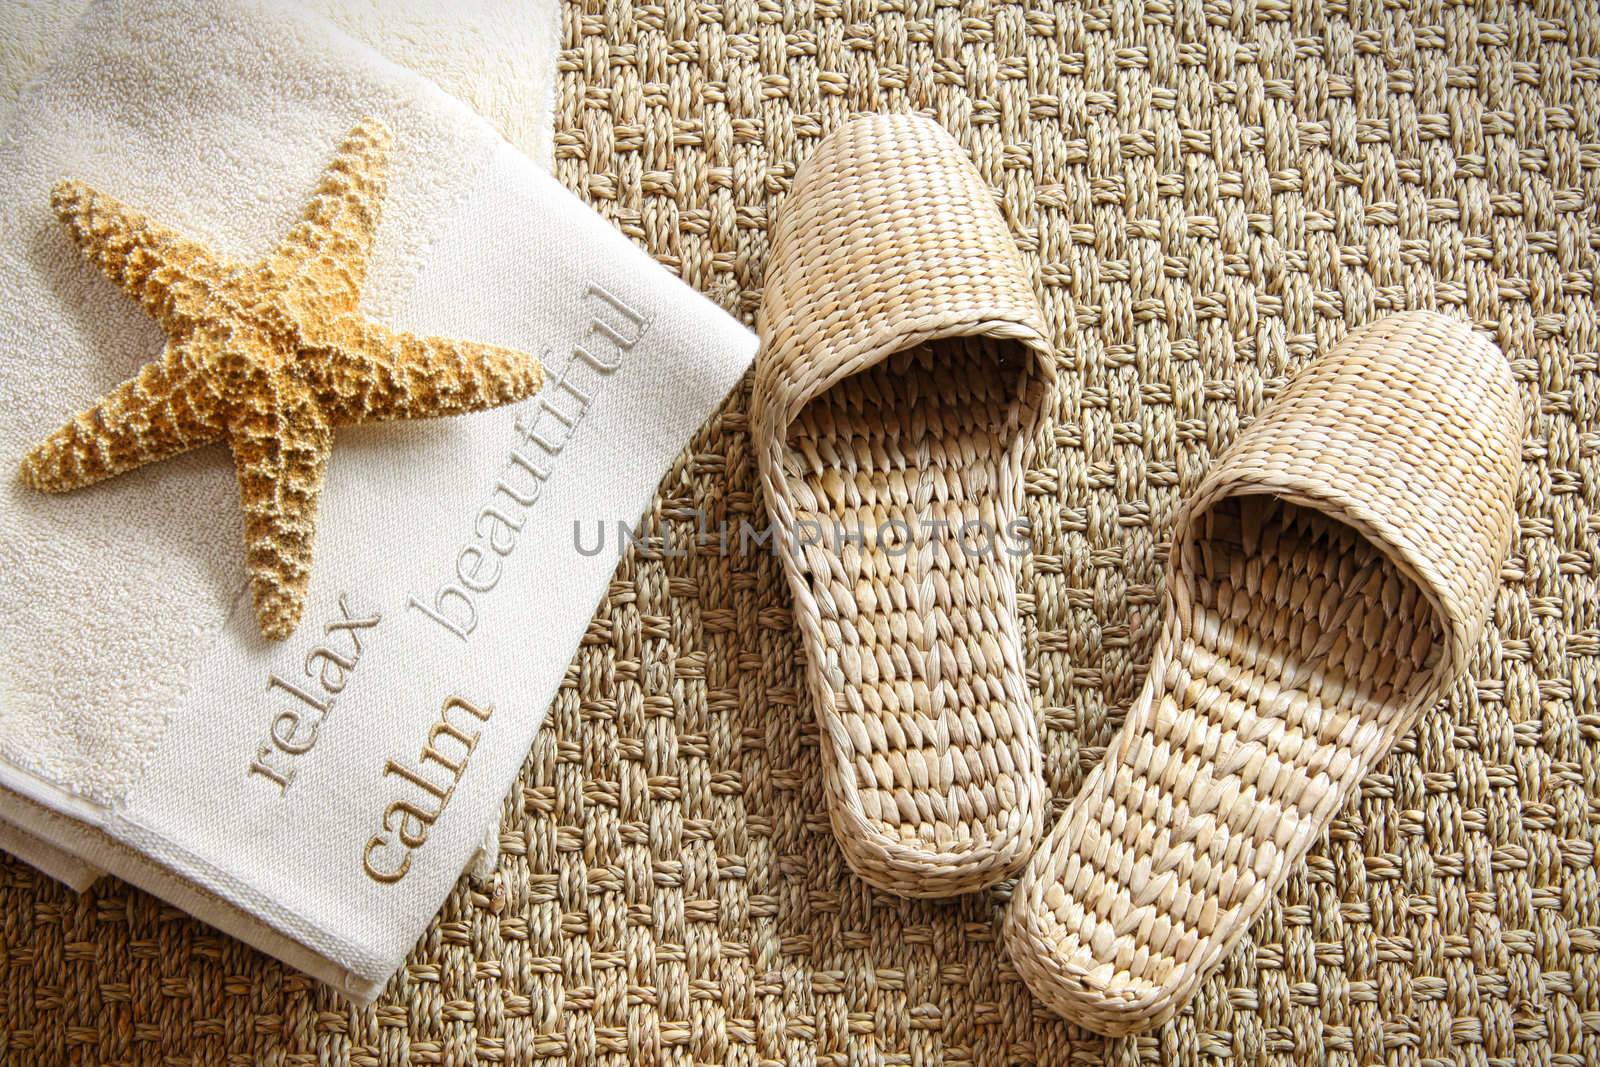 Spa slippers on seagrass carpet with towels  by Sandralise